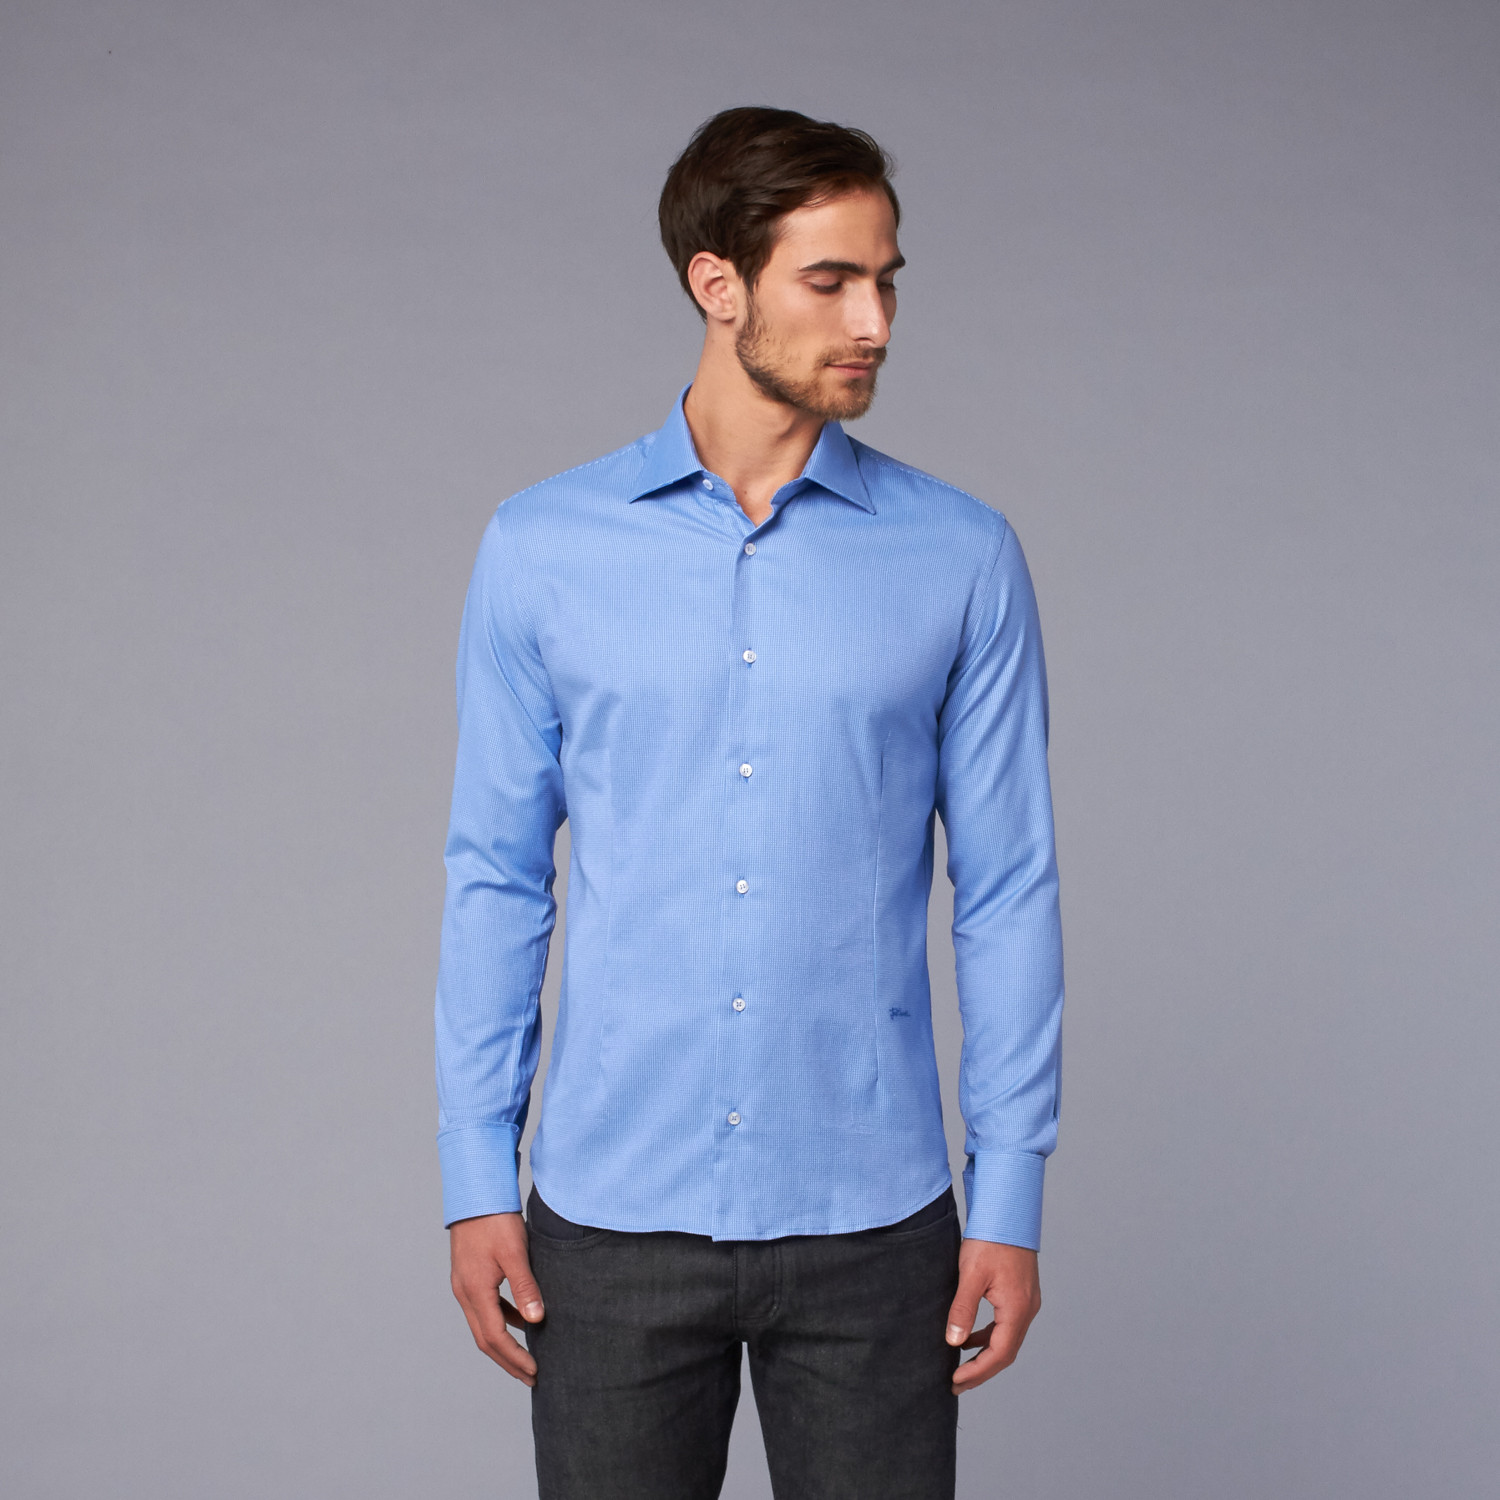 Woven Striped Shirt // Cerulean (US: 39) - Just Cavalli - Touch of Modern